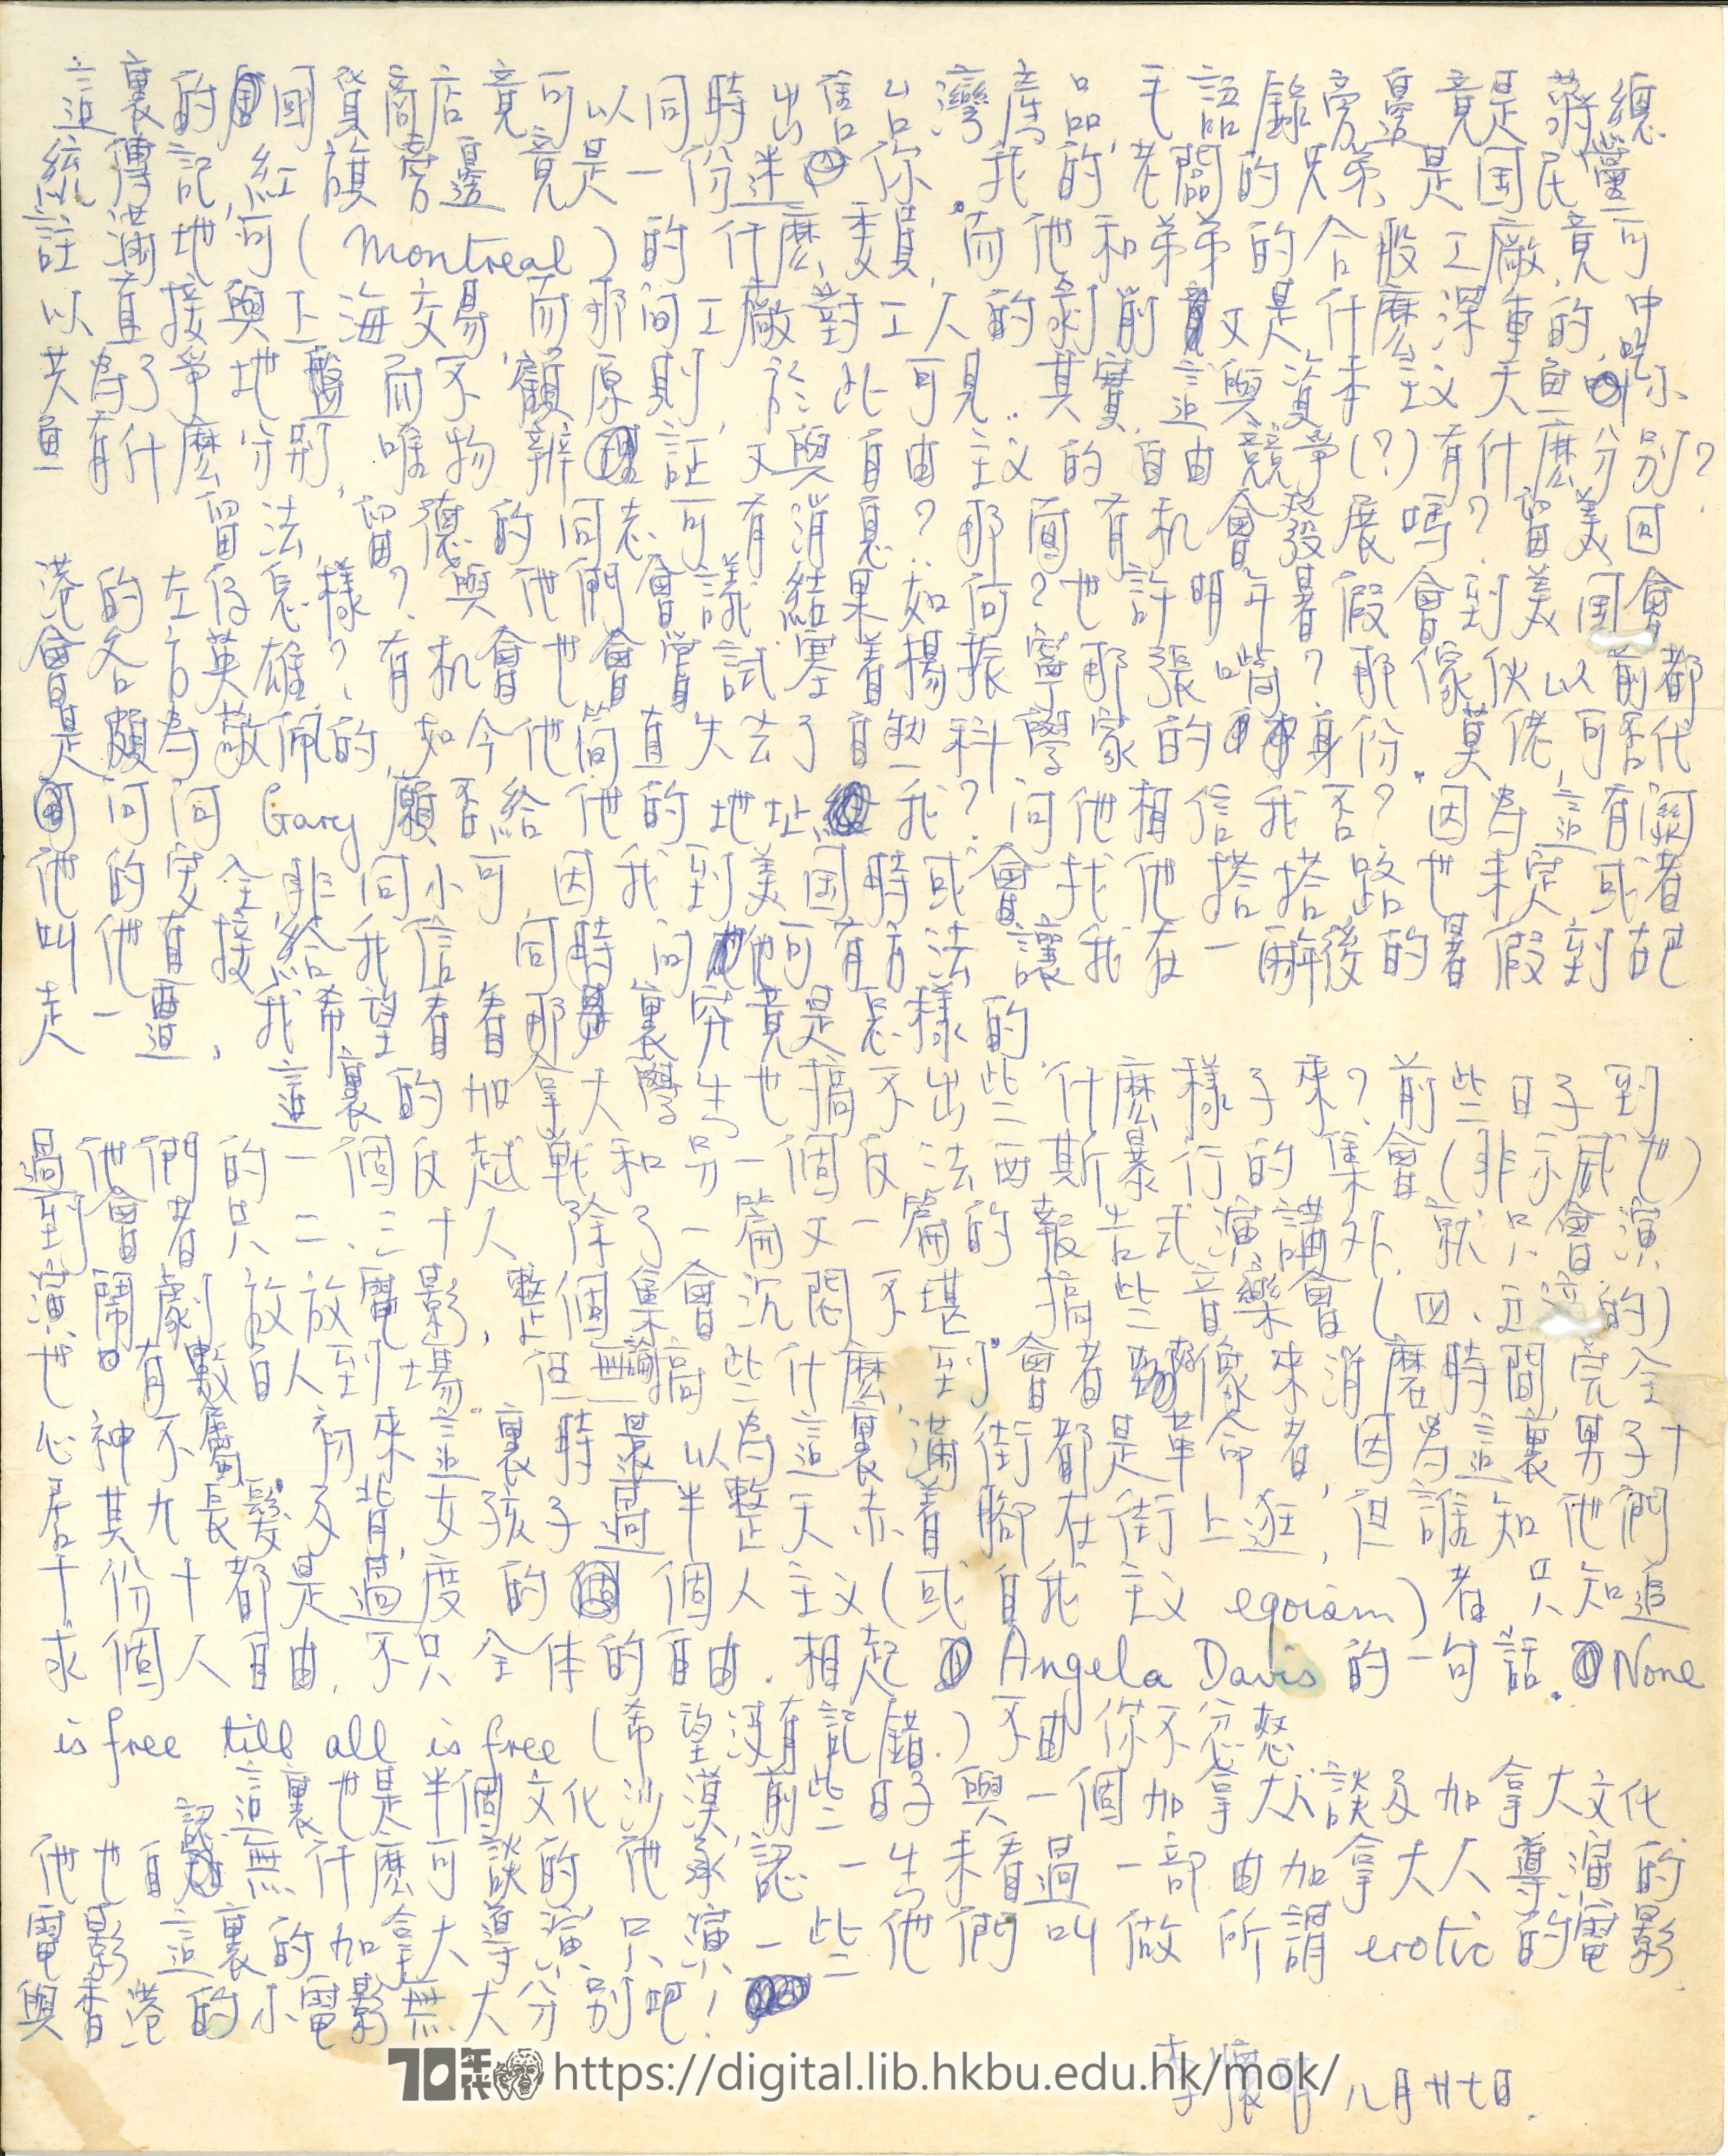   Letter from Lee Wai-ming to Mok Chiu Yu and friends 李懷明 